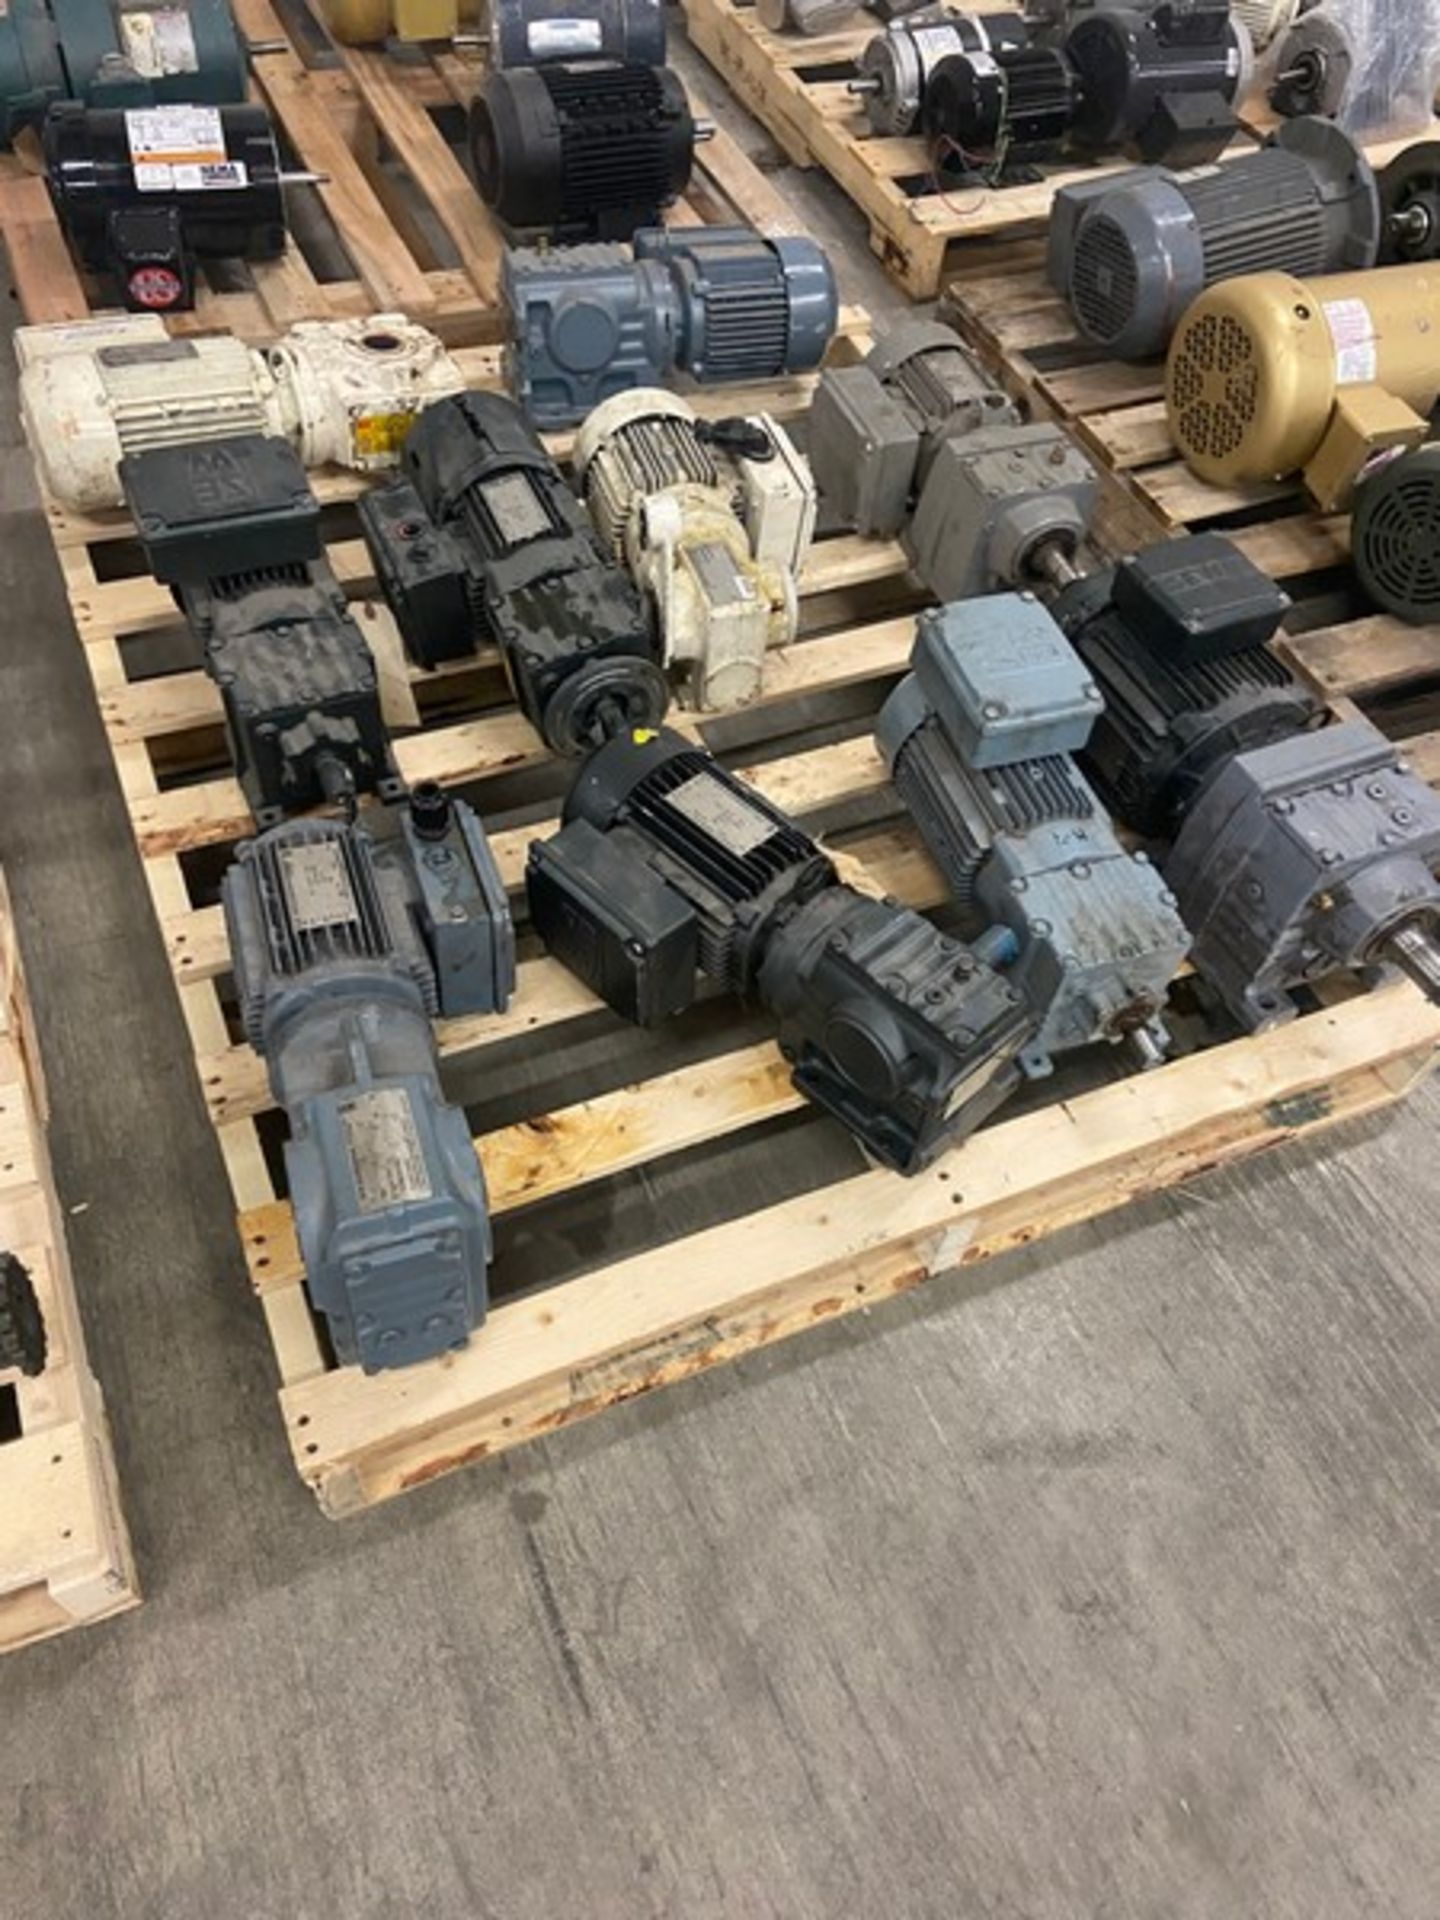 (2) Pallets of Motors Drives, Manufacturers by Baldor, Leeson, NEMA Watt Saver, 1-Pallet with Drives - Image 3 of 4